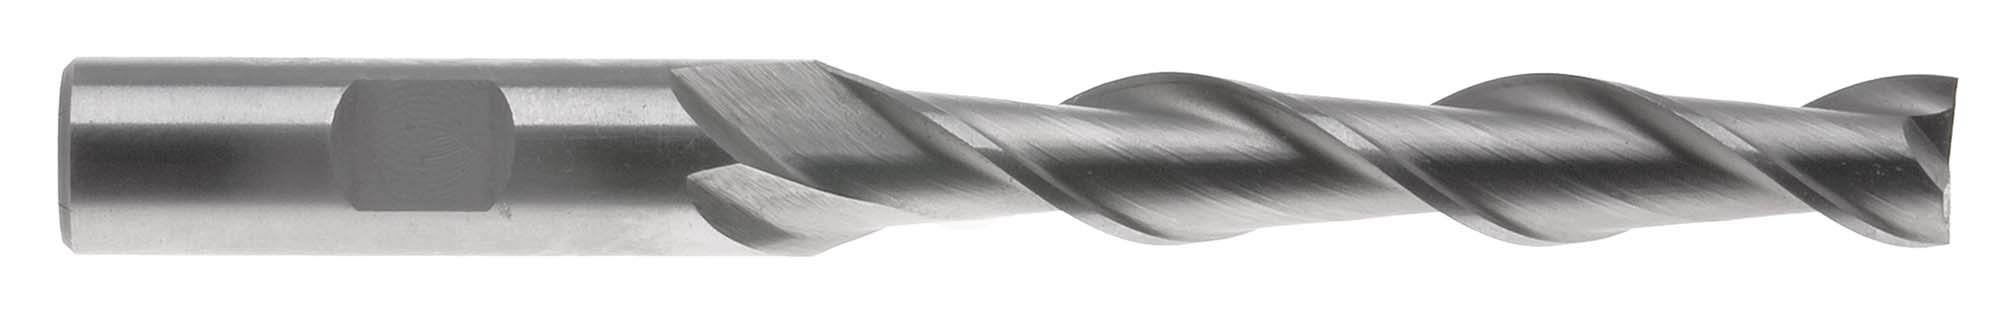 EM-AL24B  3/4"  Extra Long Aluminum Cutting 2 Flute End Mill with High Helix Flutes, 3/4" shank, High Speed Steel